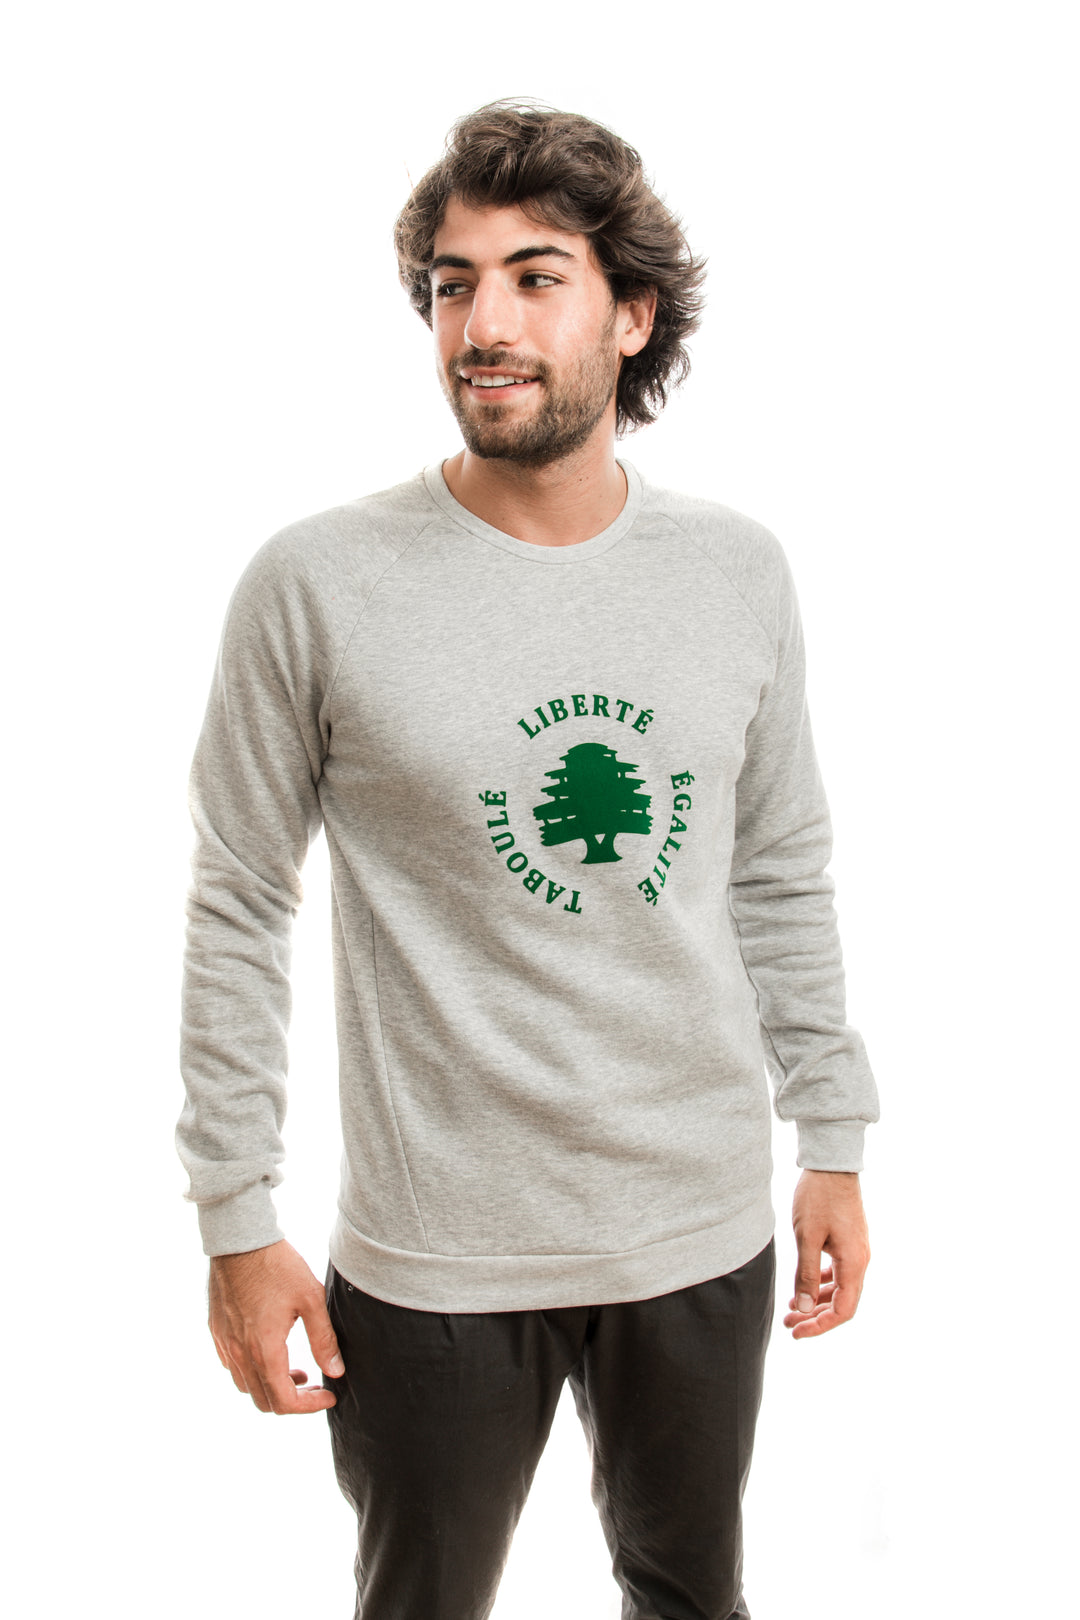 Young adult male wearing grey Sweater with Liberté Égalité Taboulé written in French and printed in green velvet in the center of the sweater along with black trousers.